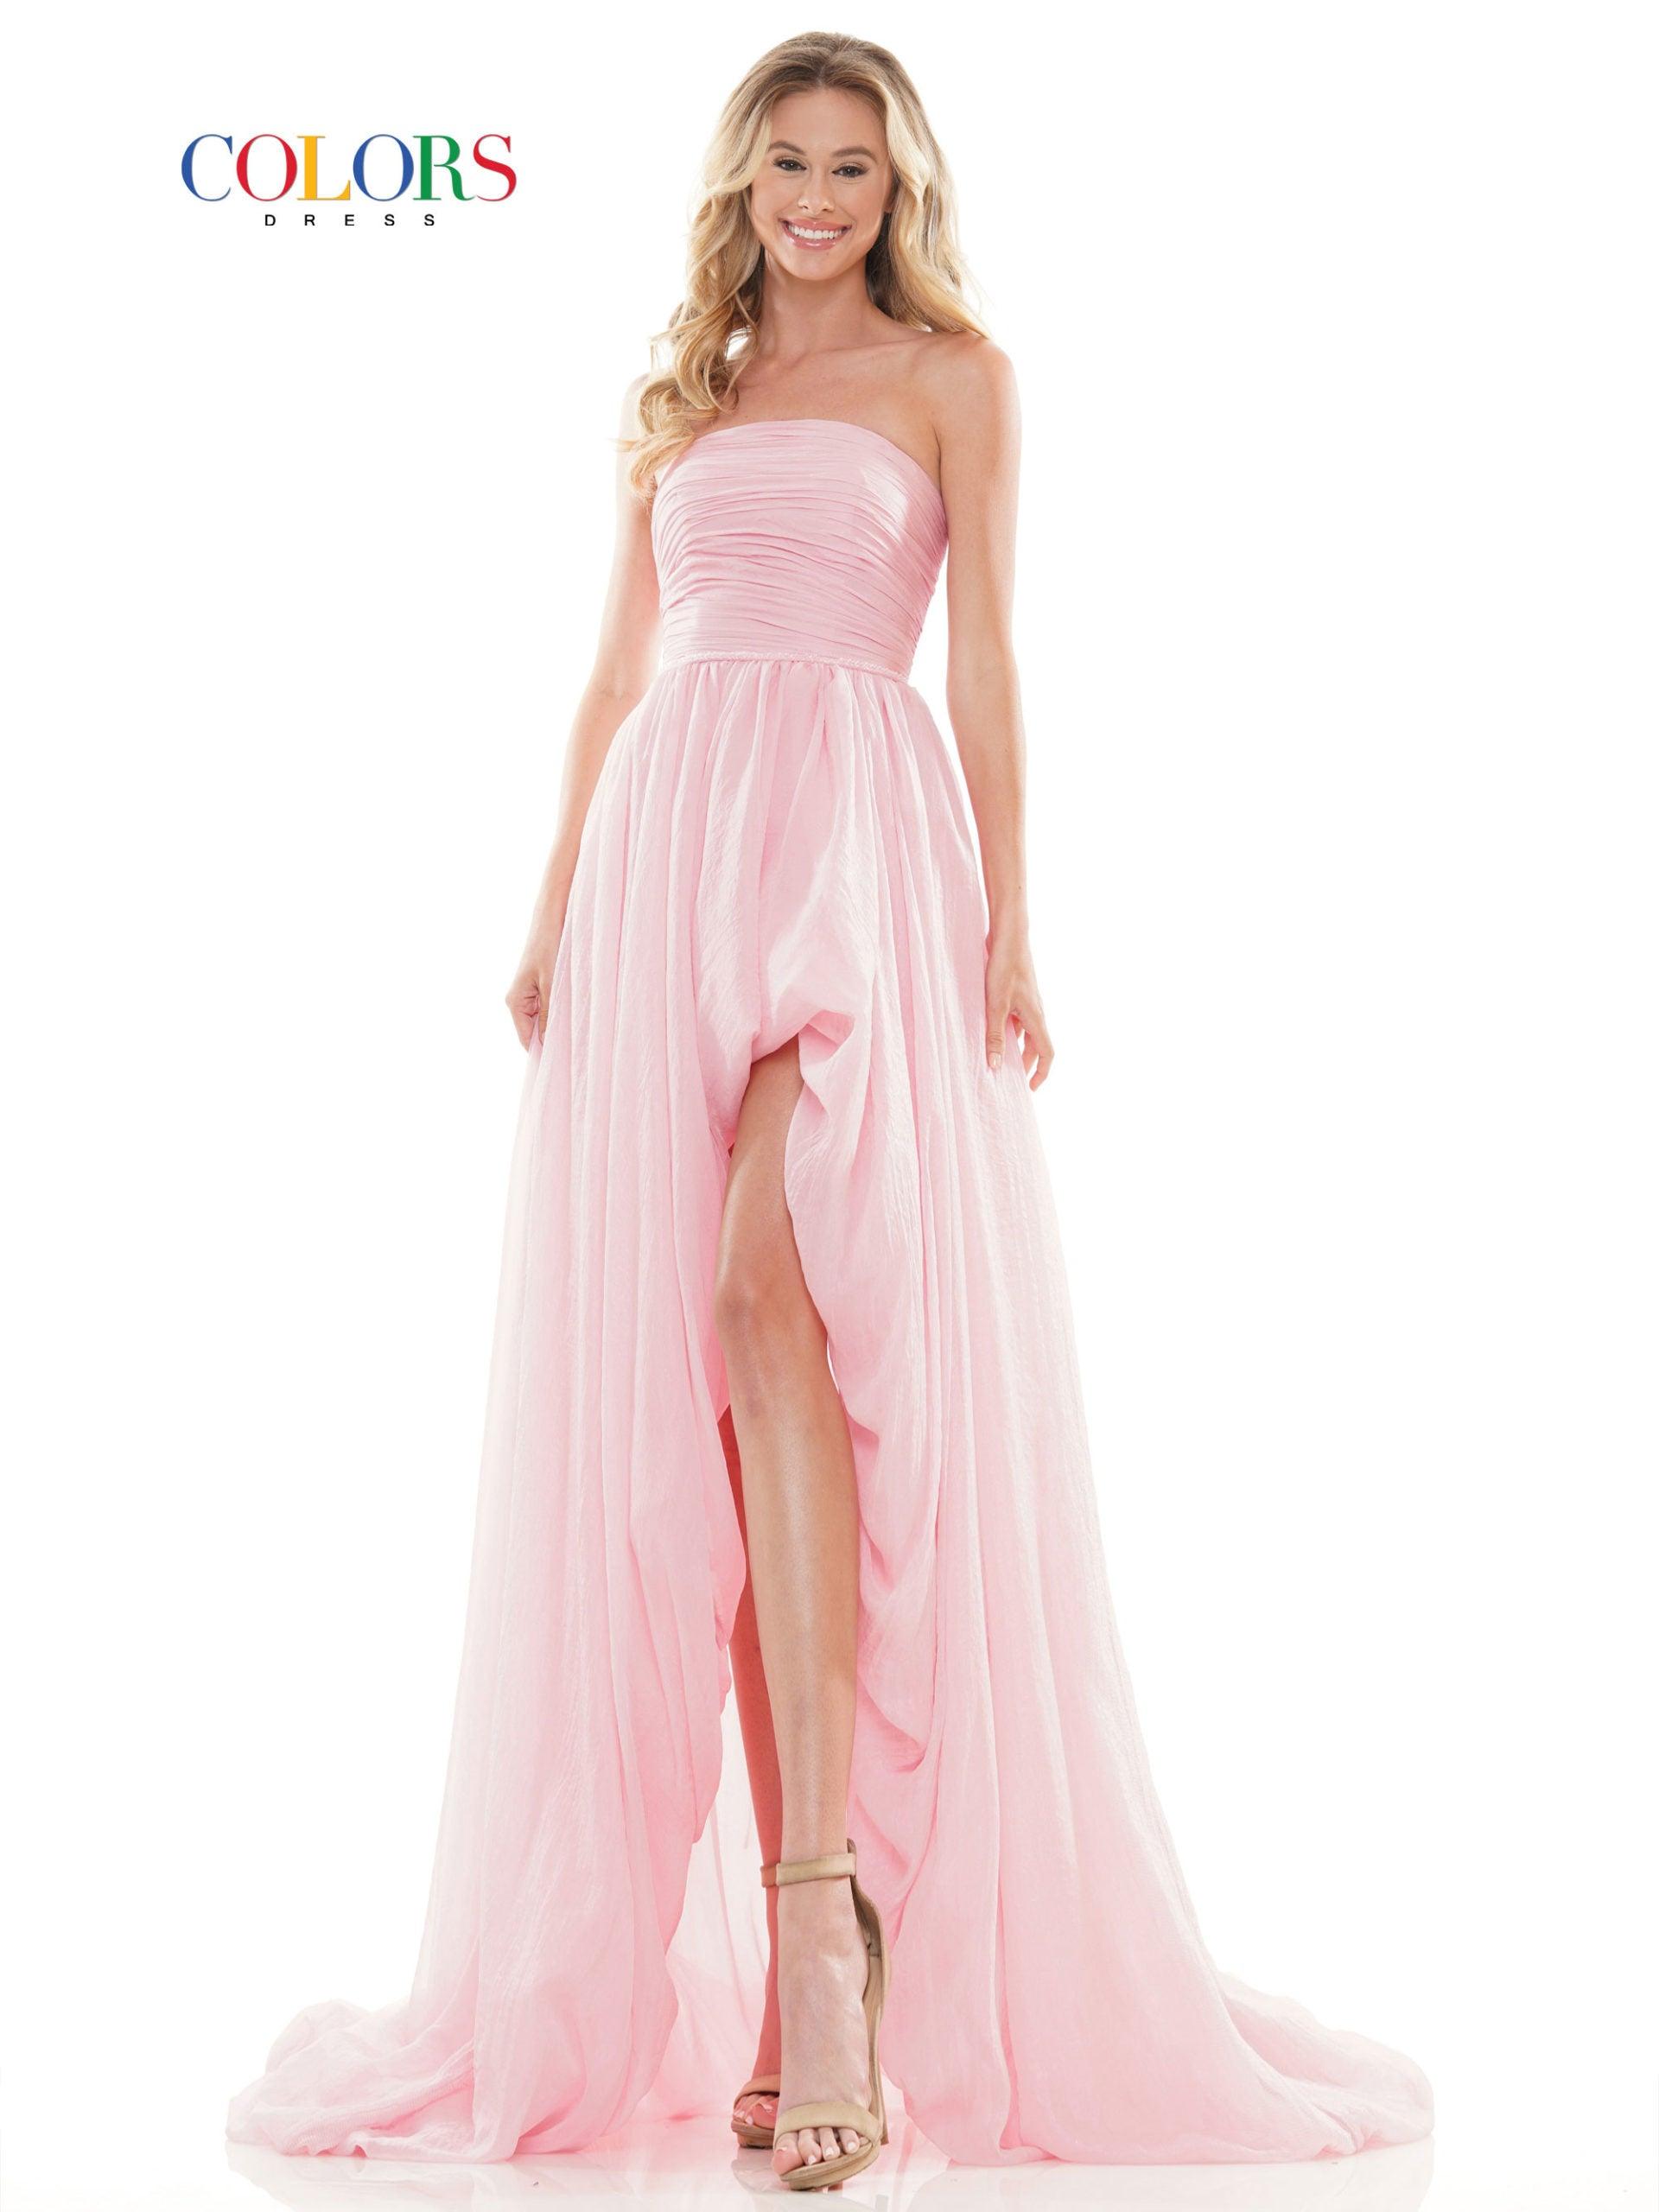 Colors High Low Strapless Chiffon Prom Dress 2748 - The Dress Outlet